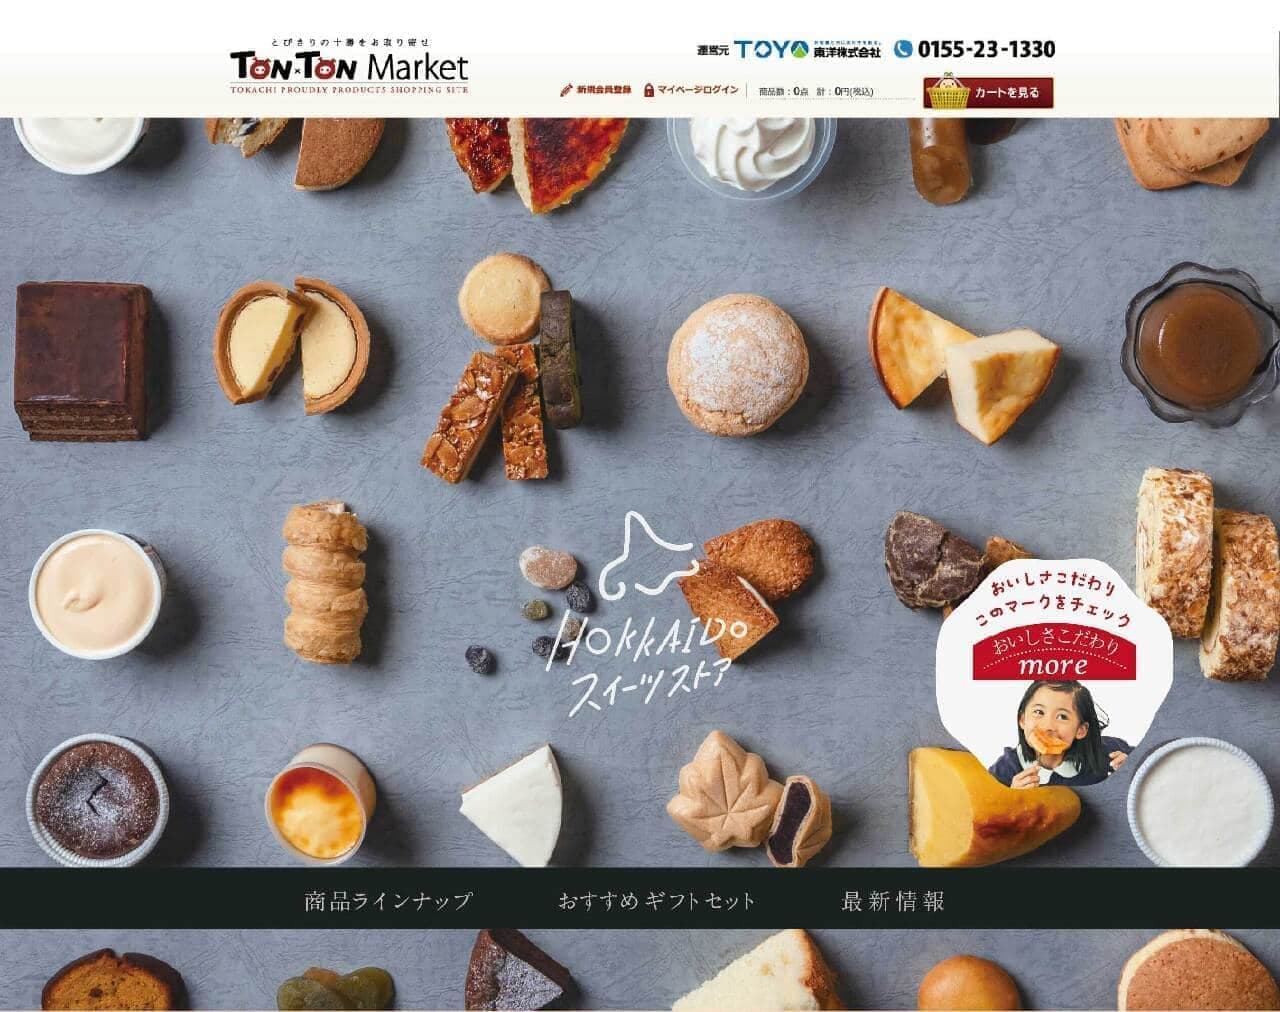 Sweets mail order site "Hokkaido Sweets Store"